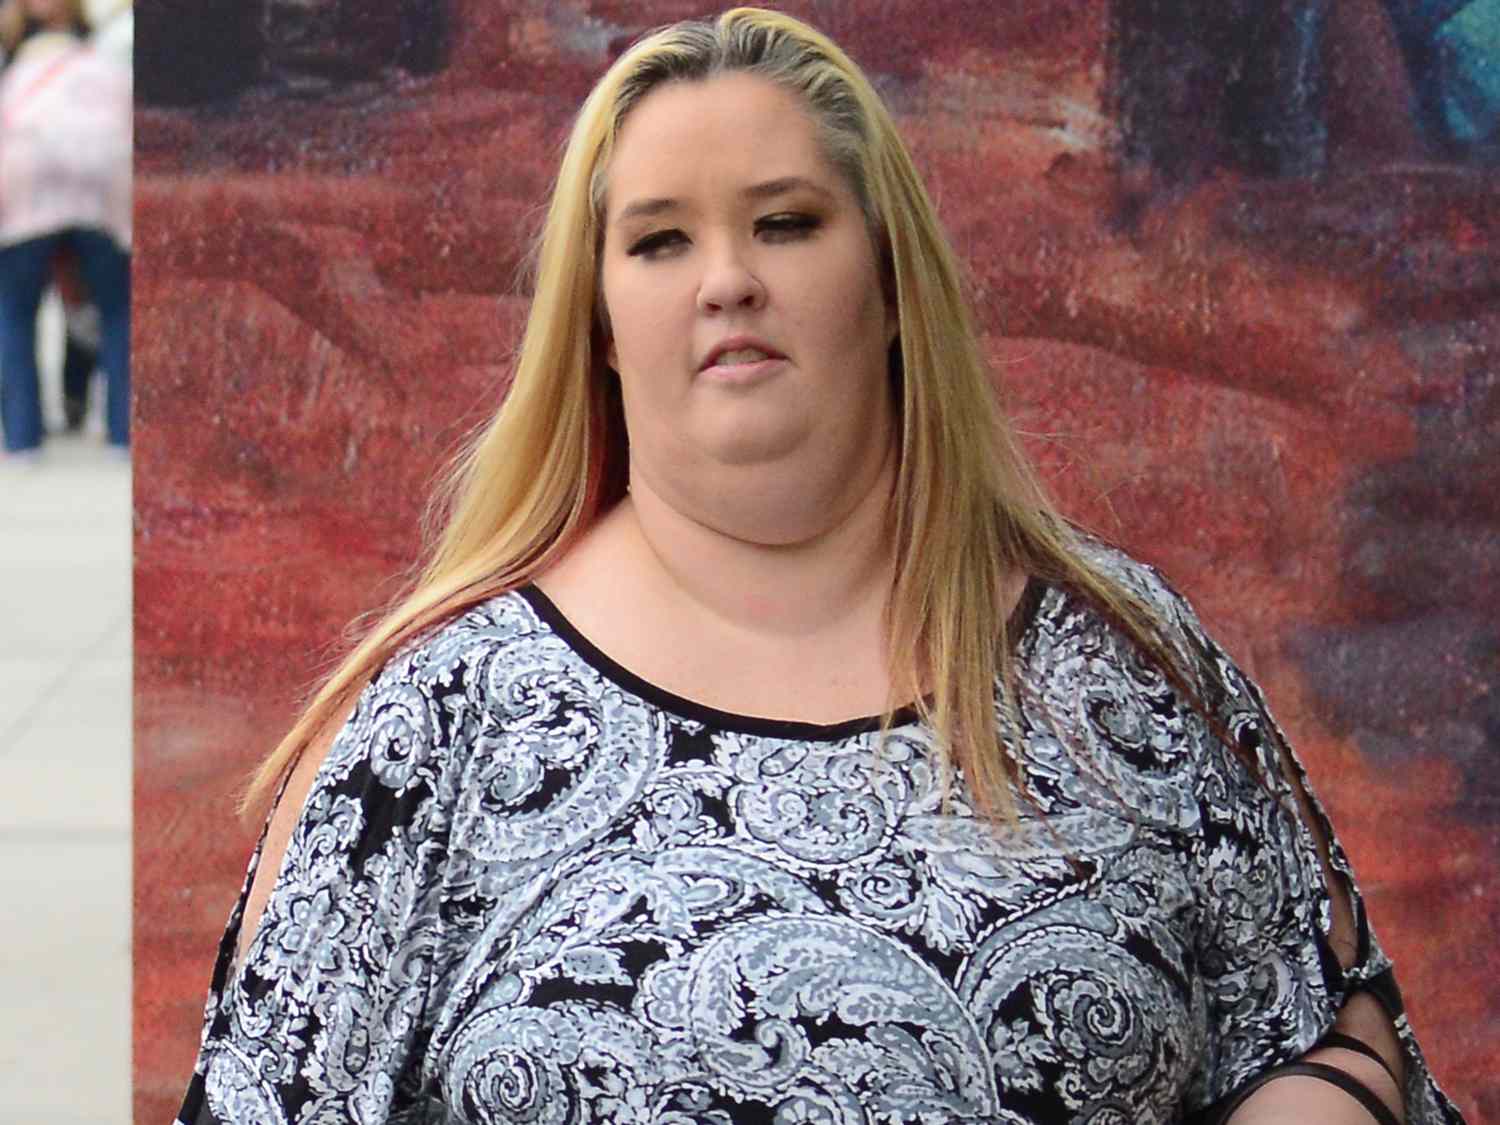 Mama June and Sugar Bear of 'Honey Boo Boo' have called it quits